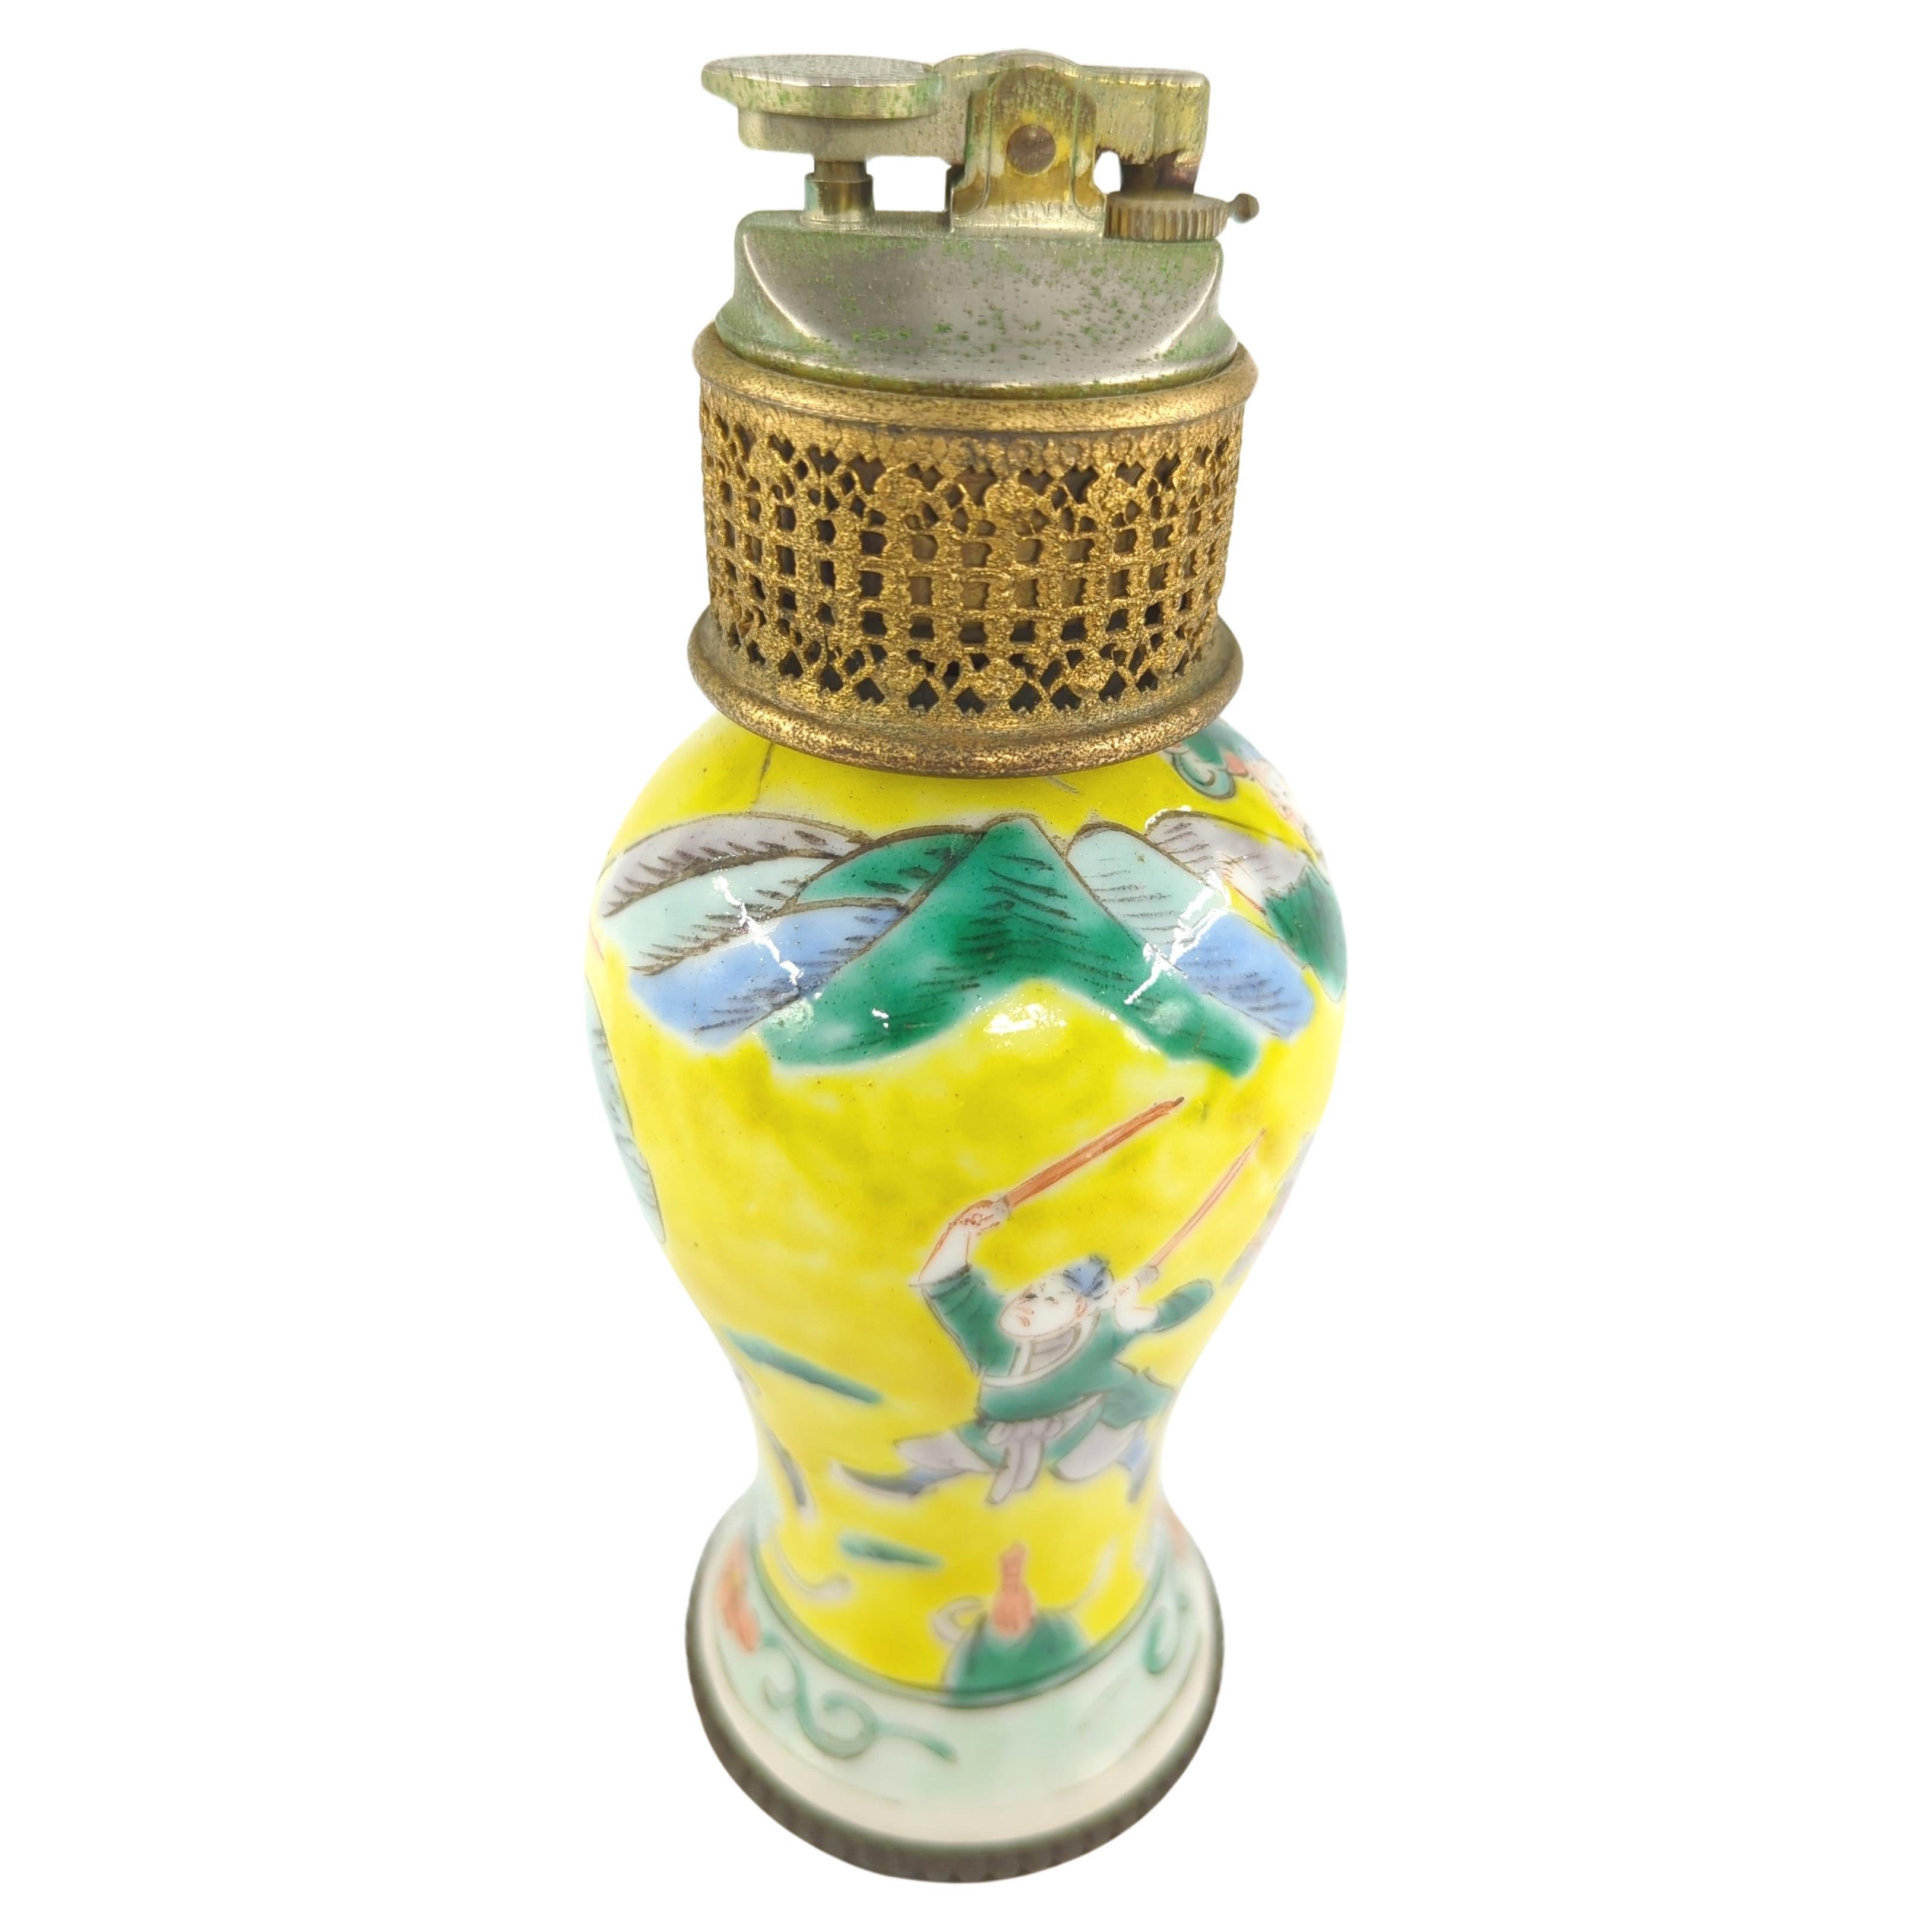 A small antique late Qing to early Republic Chinese porcelain meiping vase, ingeniously converted into a functional butane table lighter. The intricate brass mounting work dates from mid 20th century, this piece serves as a compelling intersection